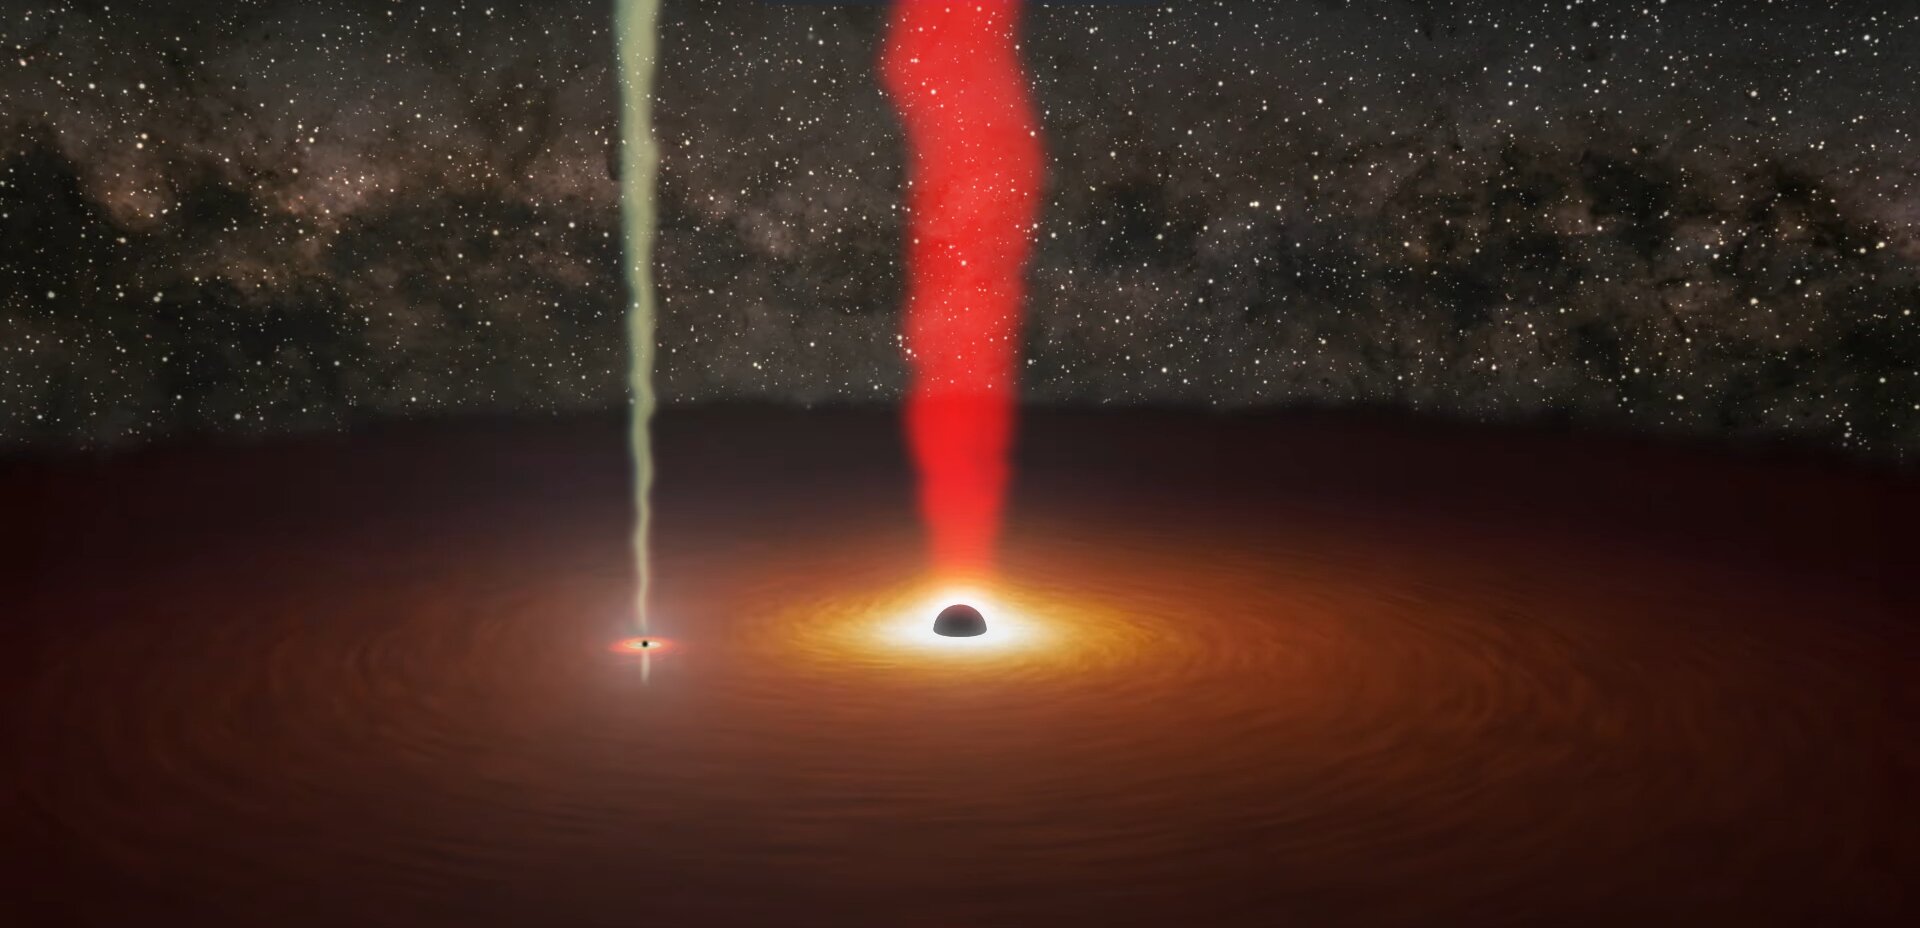 Artist's vision of the active galaxy OJ 287, in the centre of which there is not one, but two black holes orbiting each other. Both objects are accompanied by jets: a larger one, associated with the more massive black hole, with a reddish colour, and a smaller one with a yellowish colour. Usually only the reddish jet is visible, but for 12 hours in November 2021, the fainter jet became the dominant one. This provided the first direct observation of the presence of a smaller black hole in the system. Source: NASA/JPL-Caltech/R. Hurt (IPAC) & M. Mugrauer (AIU Jena).